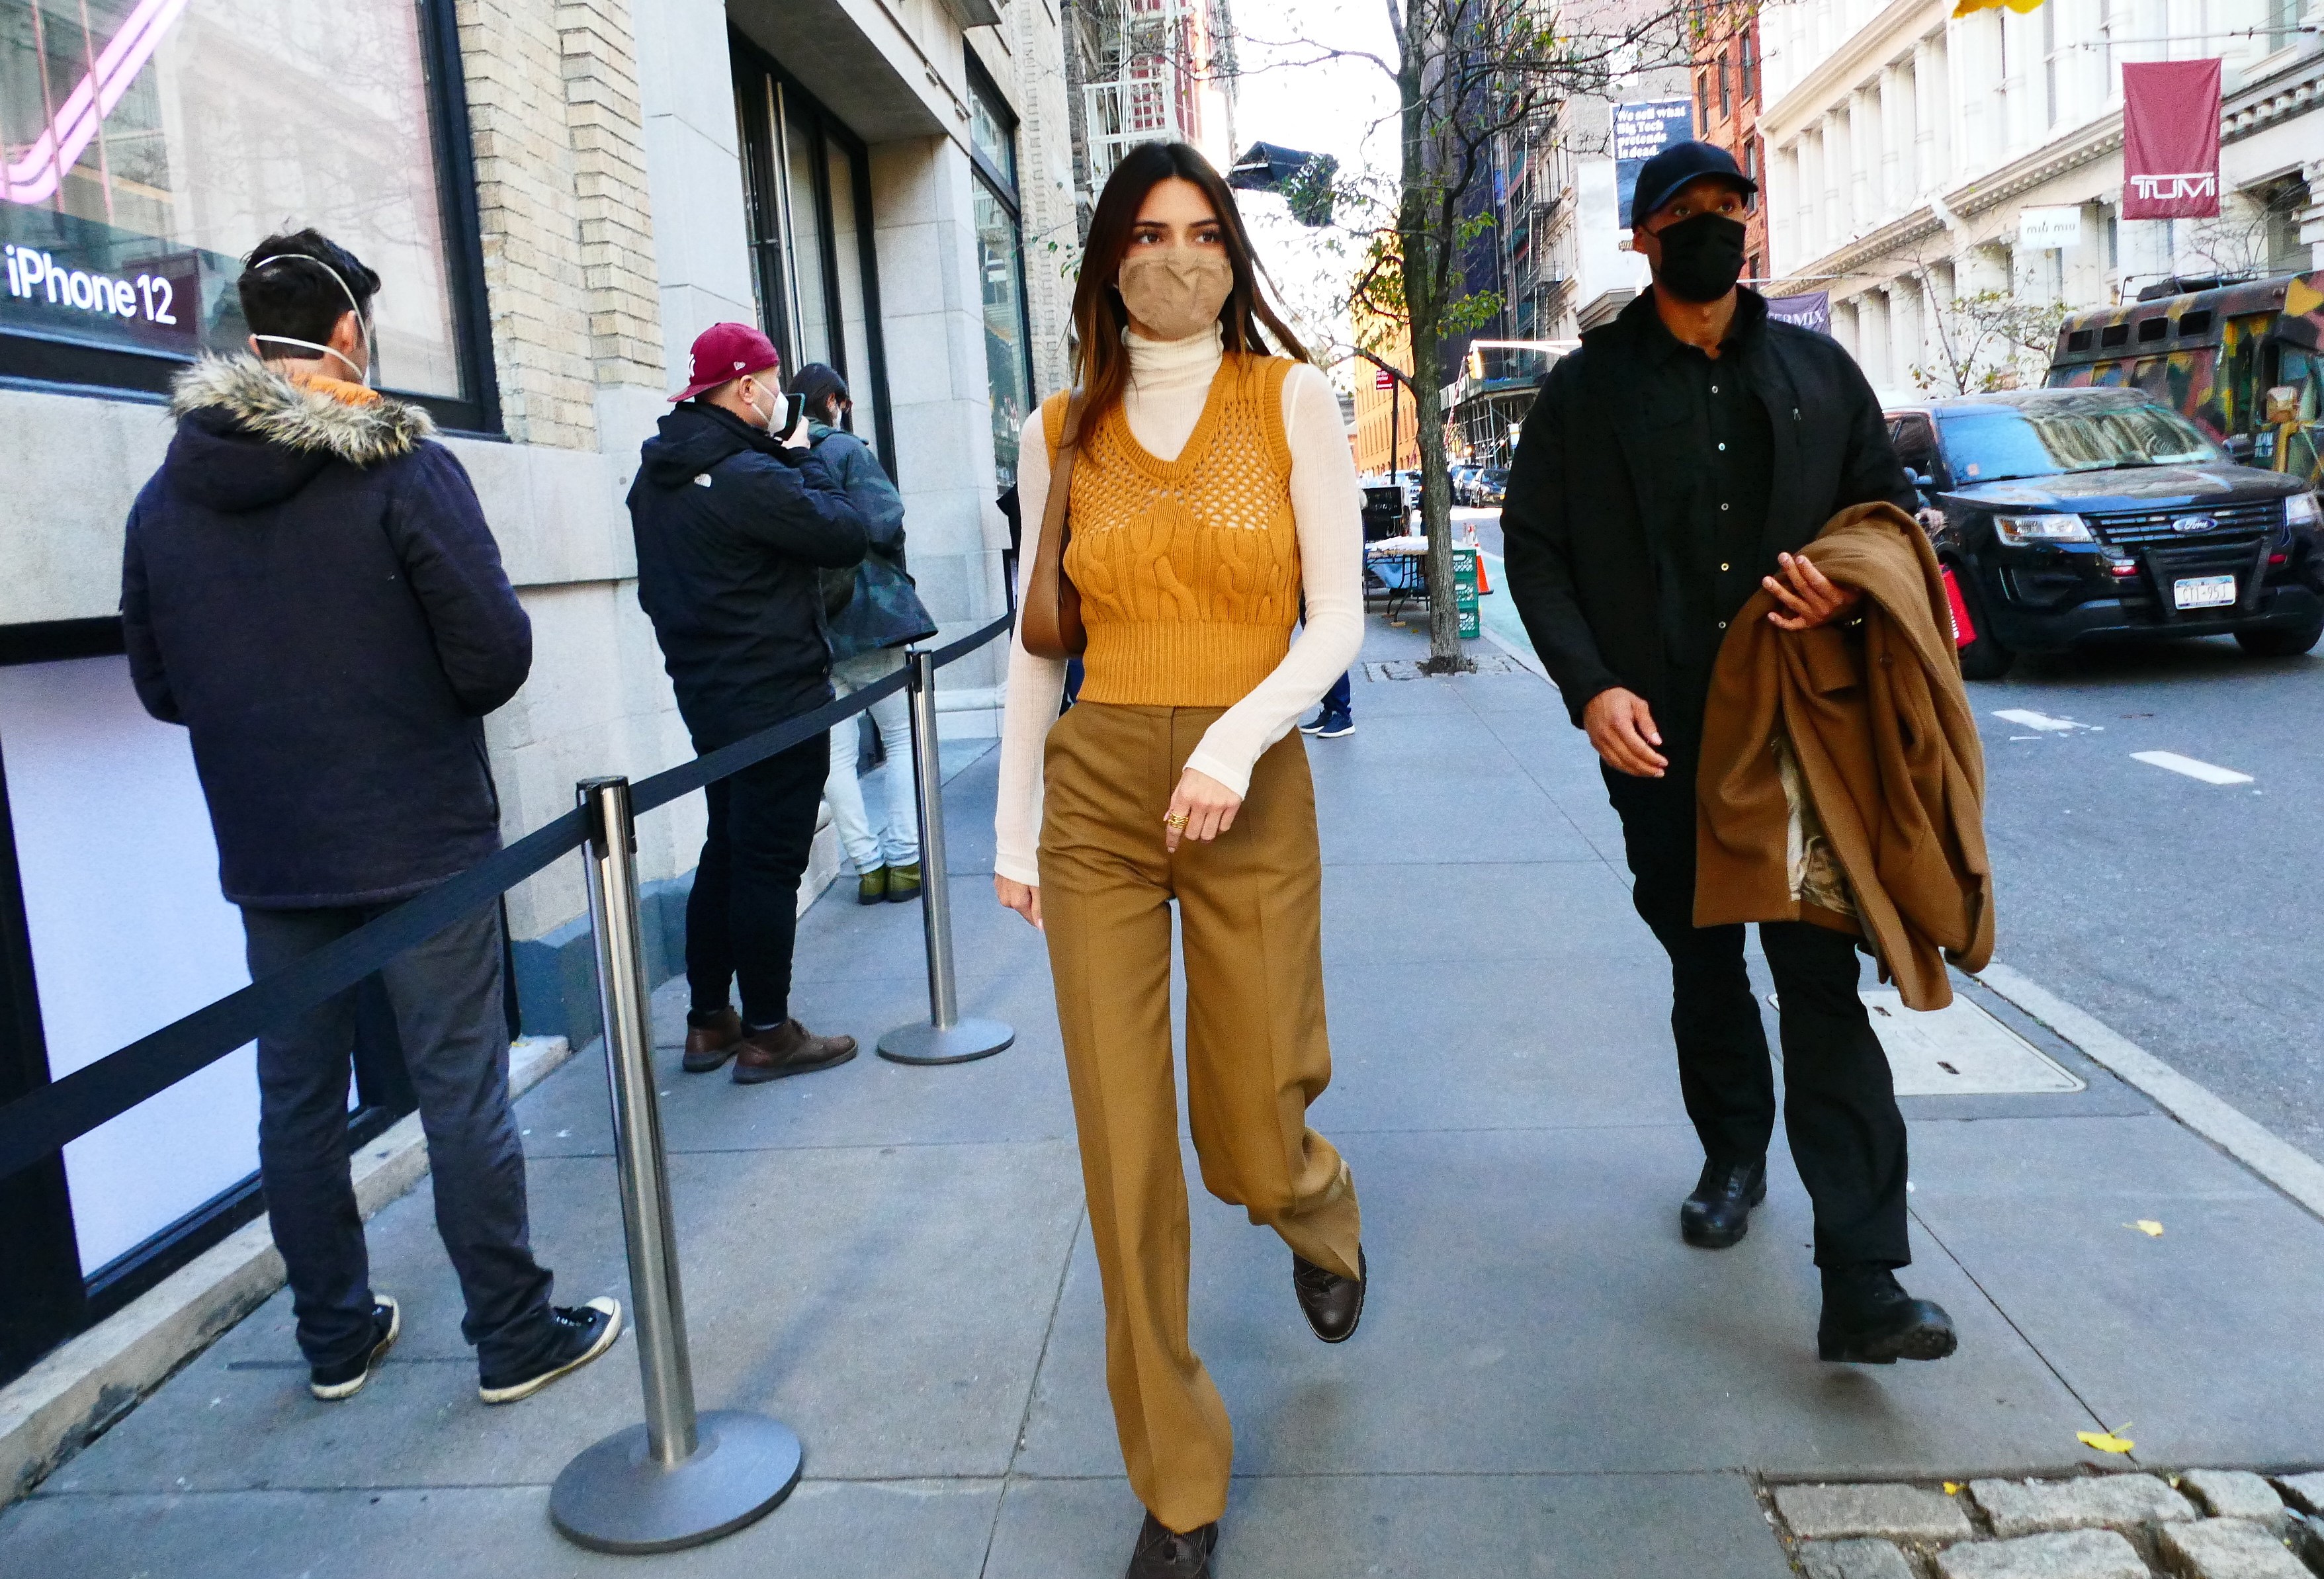 Kendall Jenner's Latest Fashion Obsession Is Straight Out of Your